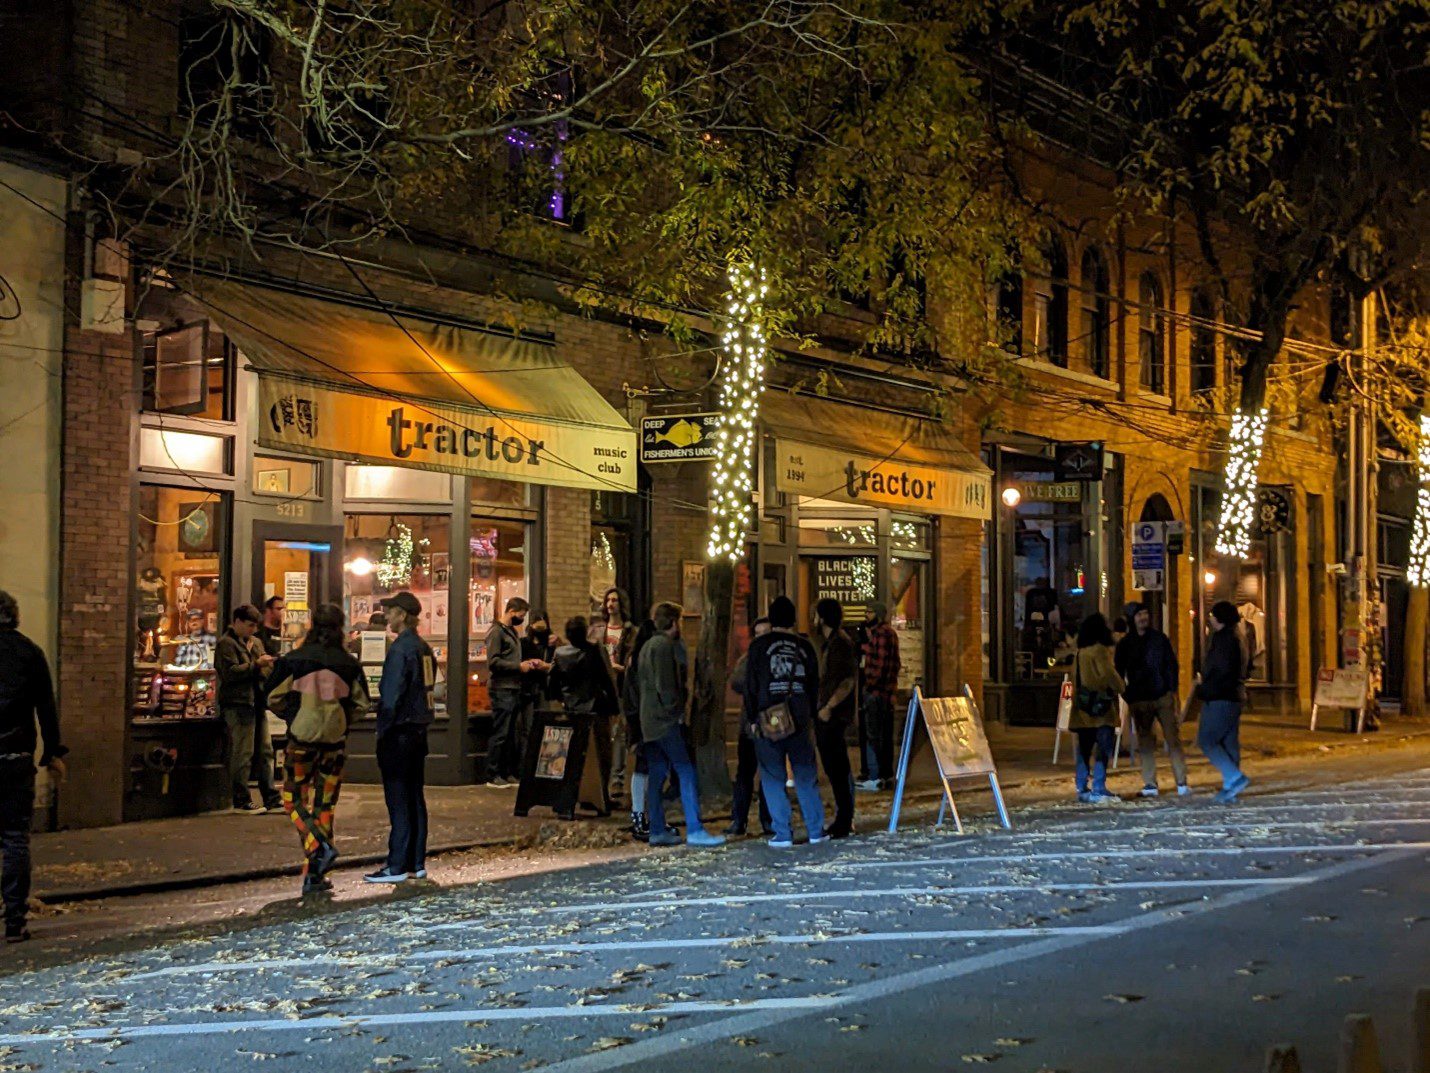 People standing outside a music venue on a street in the nighttime. Large buildings, trees, and no parking signs are in the image, as well as lights on the trees.